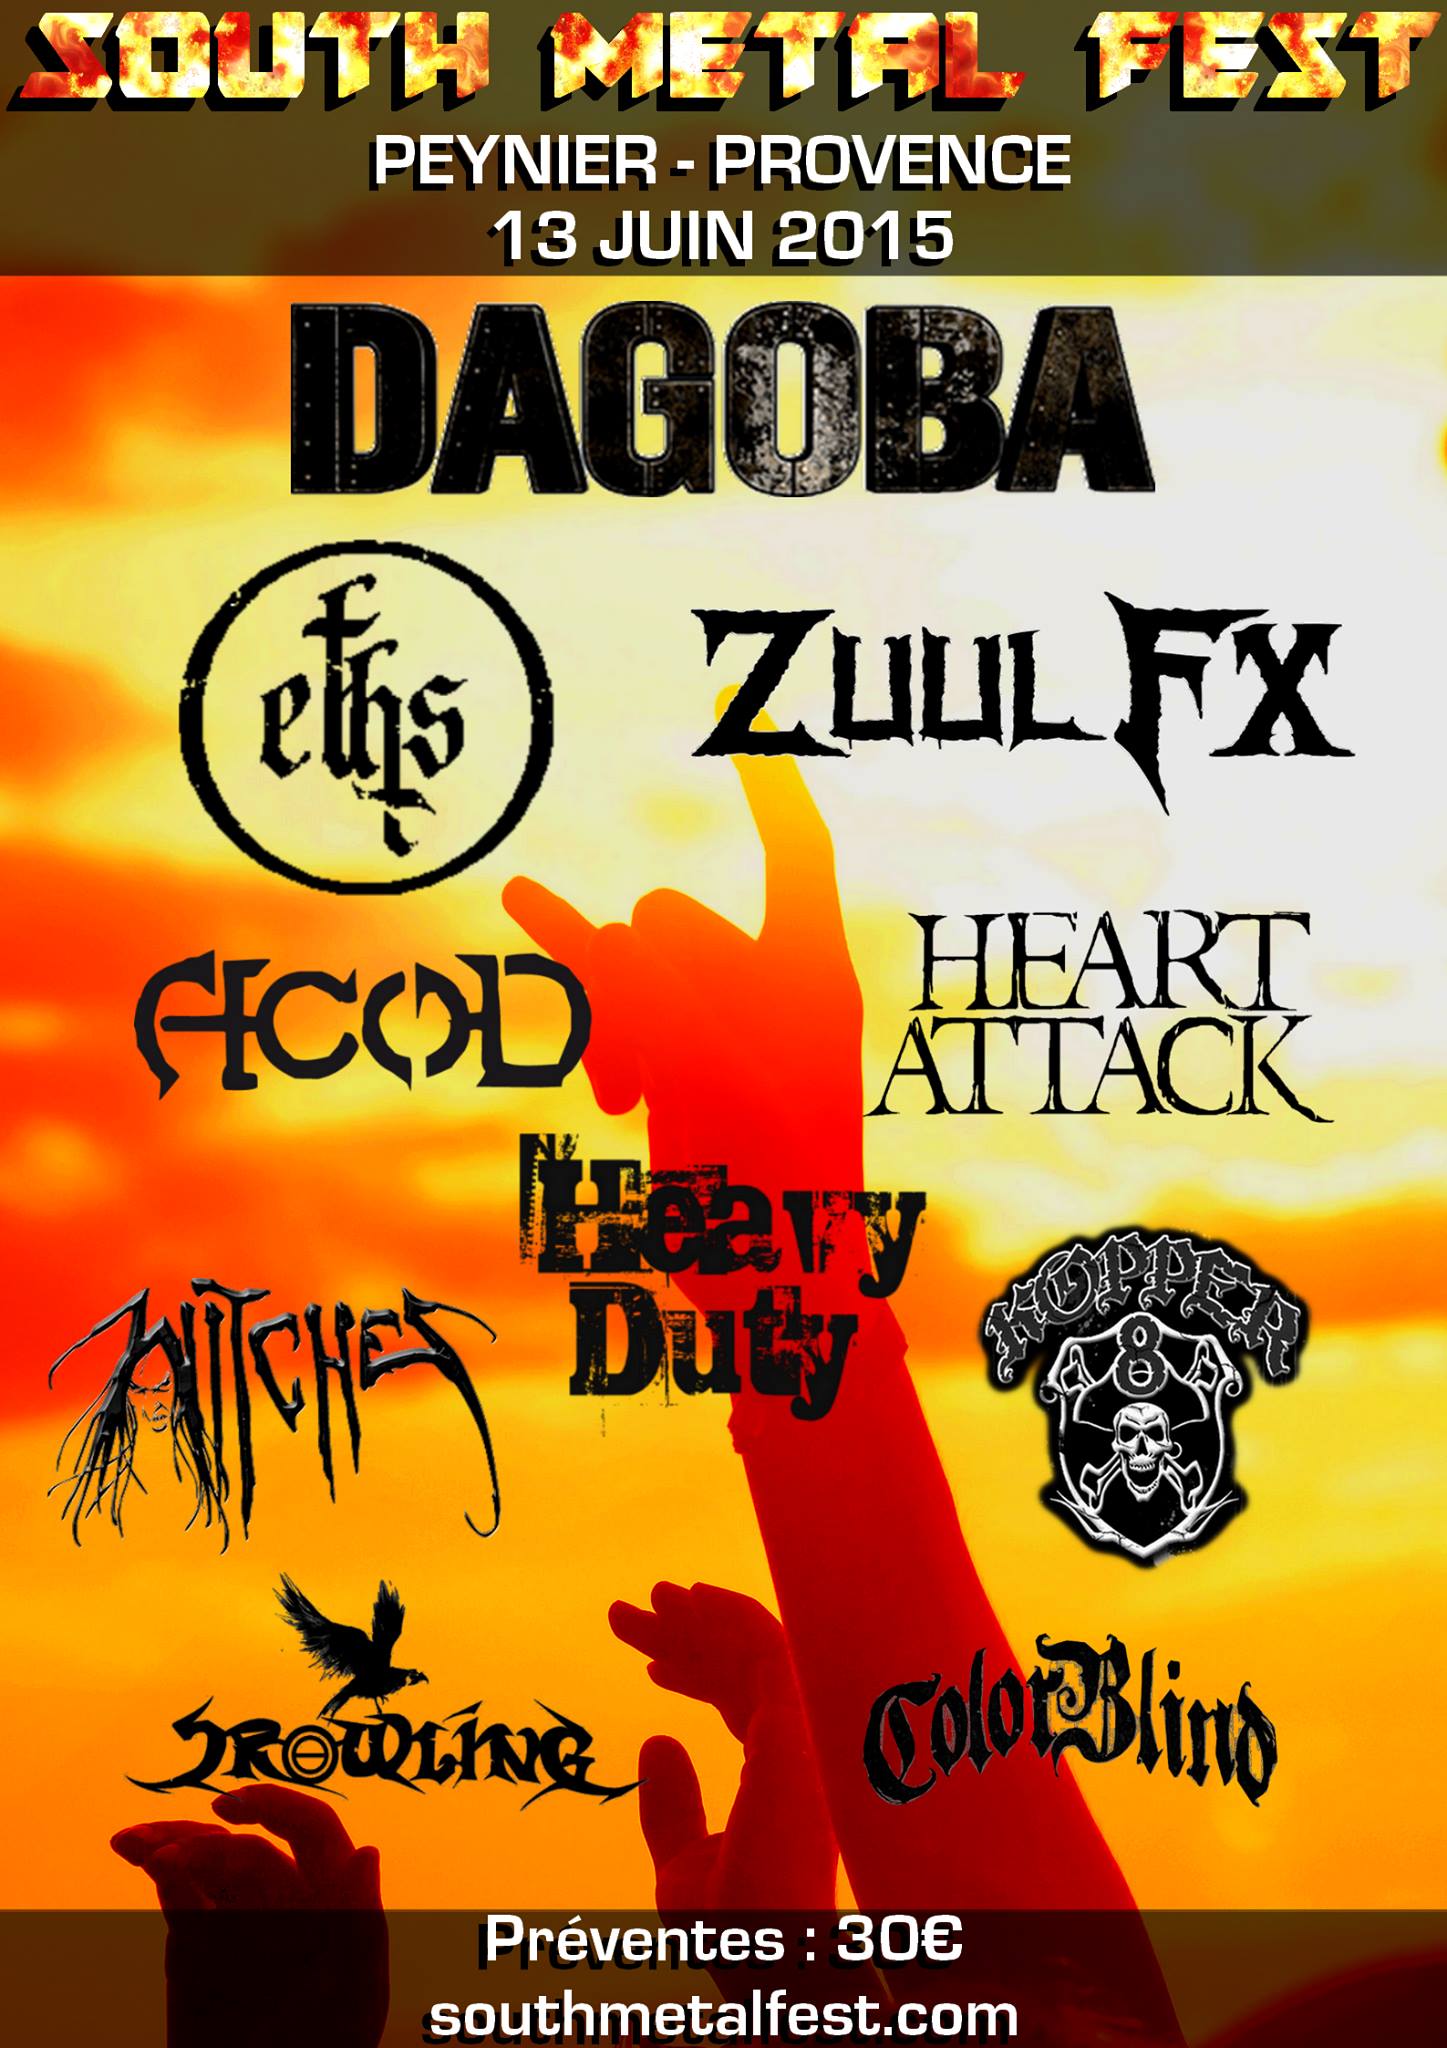 Witches flyer Dagoba + Eths + Zuul FX + A.c.o.D.+ Heavy Duty + Heart Attack + Kopper 8 + WITCHES + Crowling + Colorblind @  South Metal Fest Peynier (13, France)